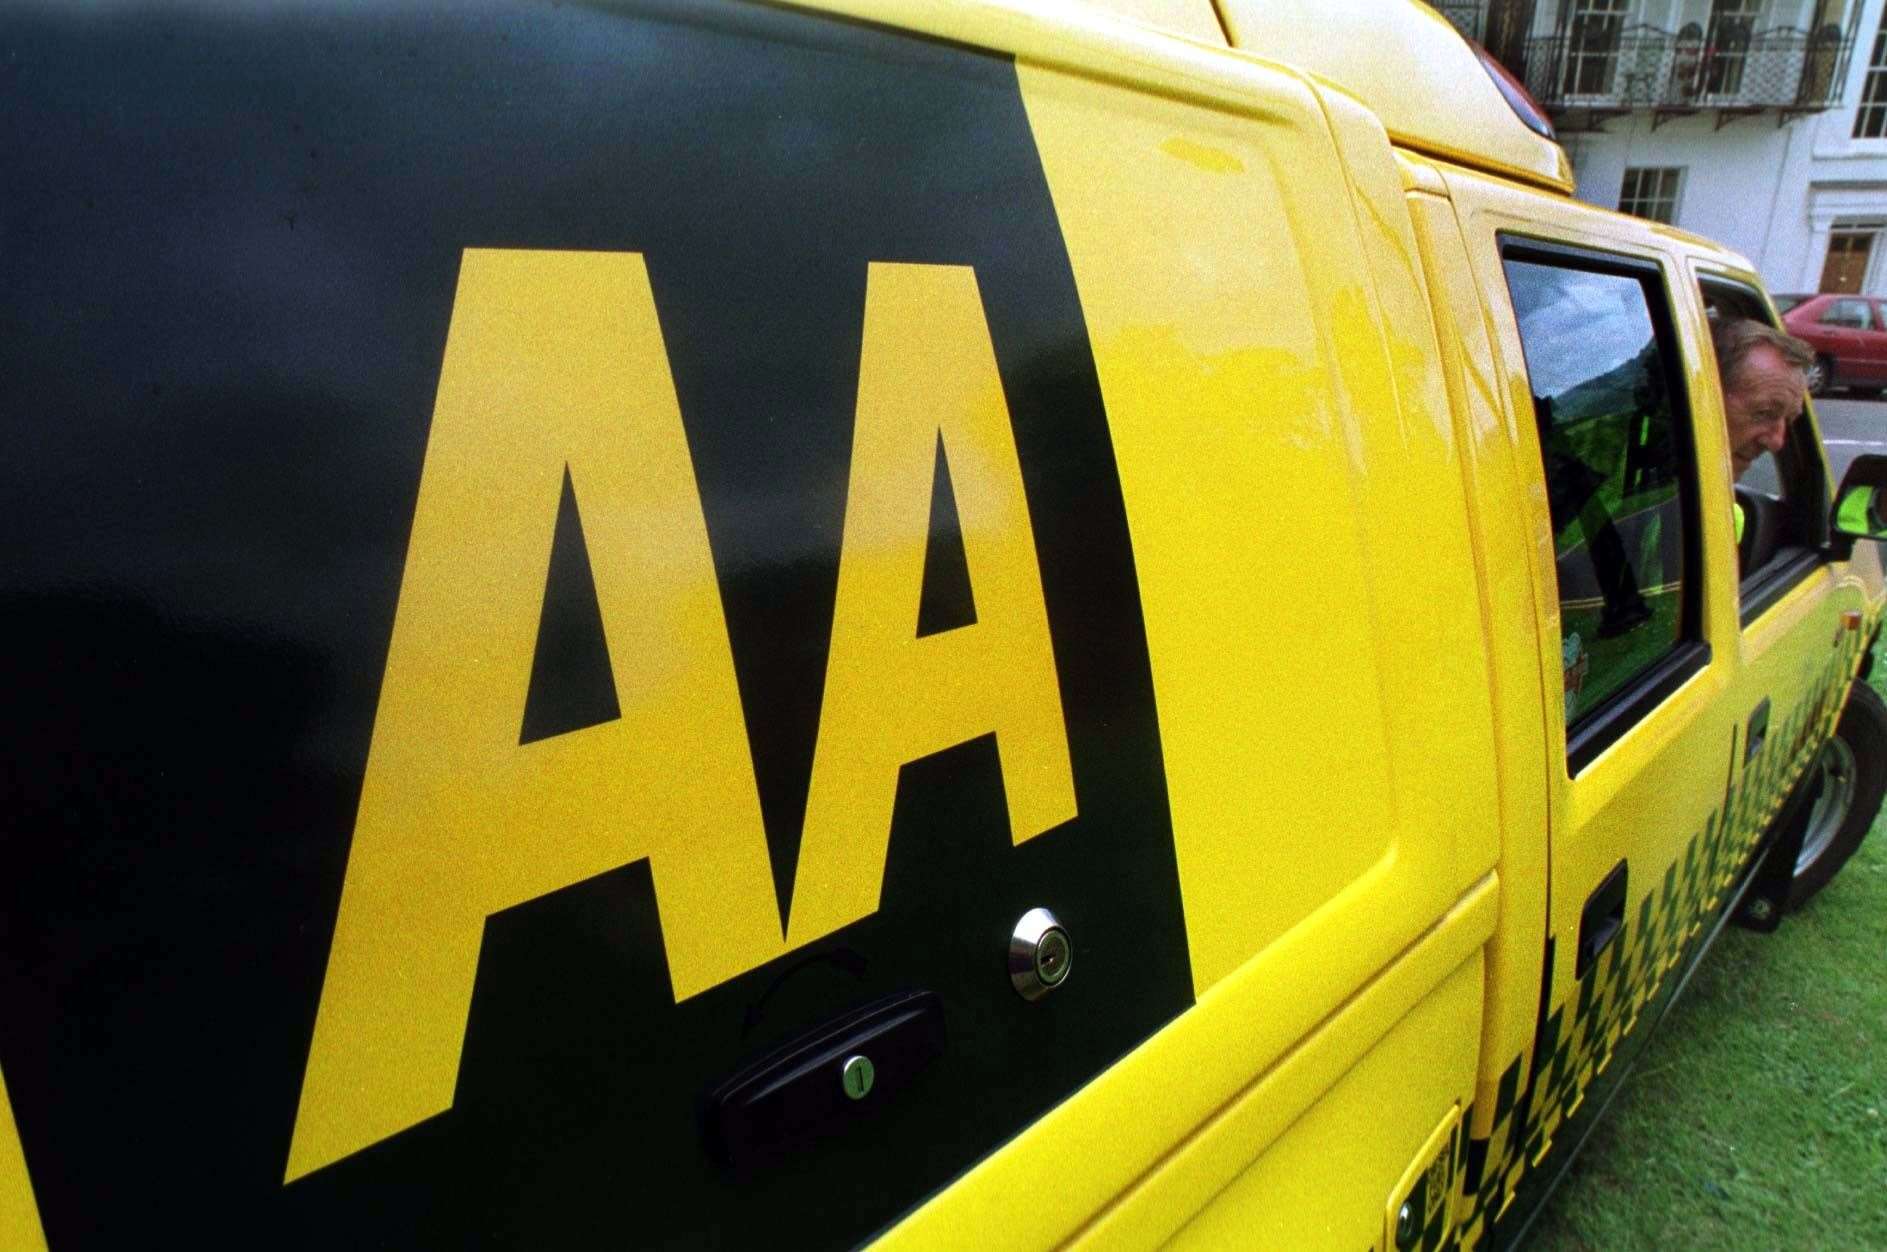 The AA has received an offer valuing the company at £218 million. (Barry Batchelor / PA)